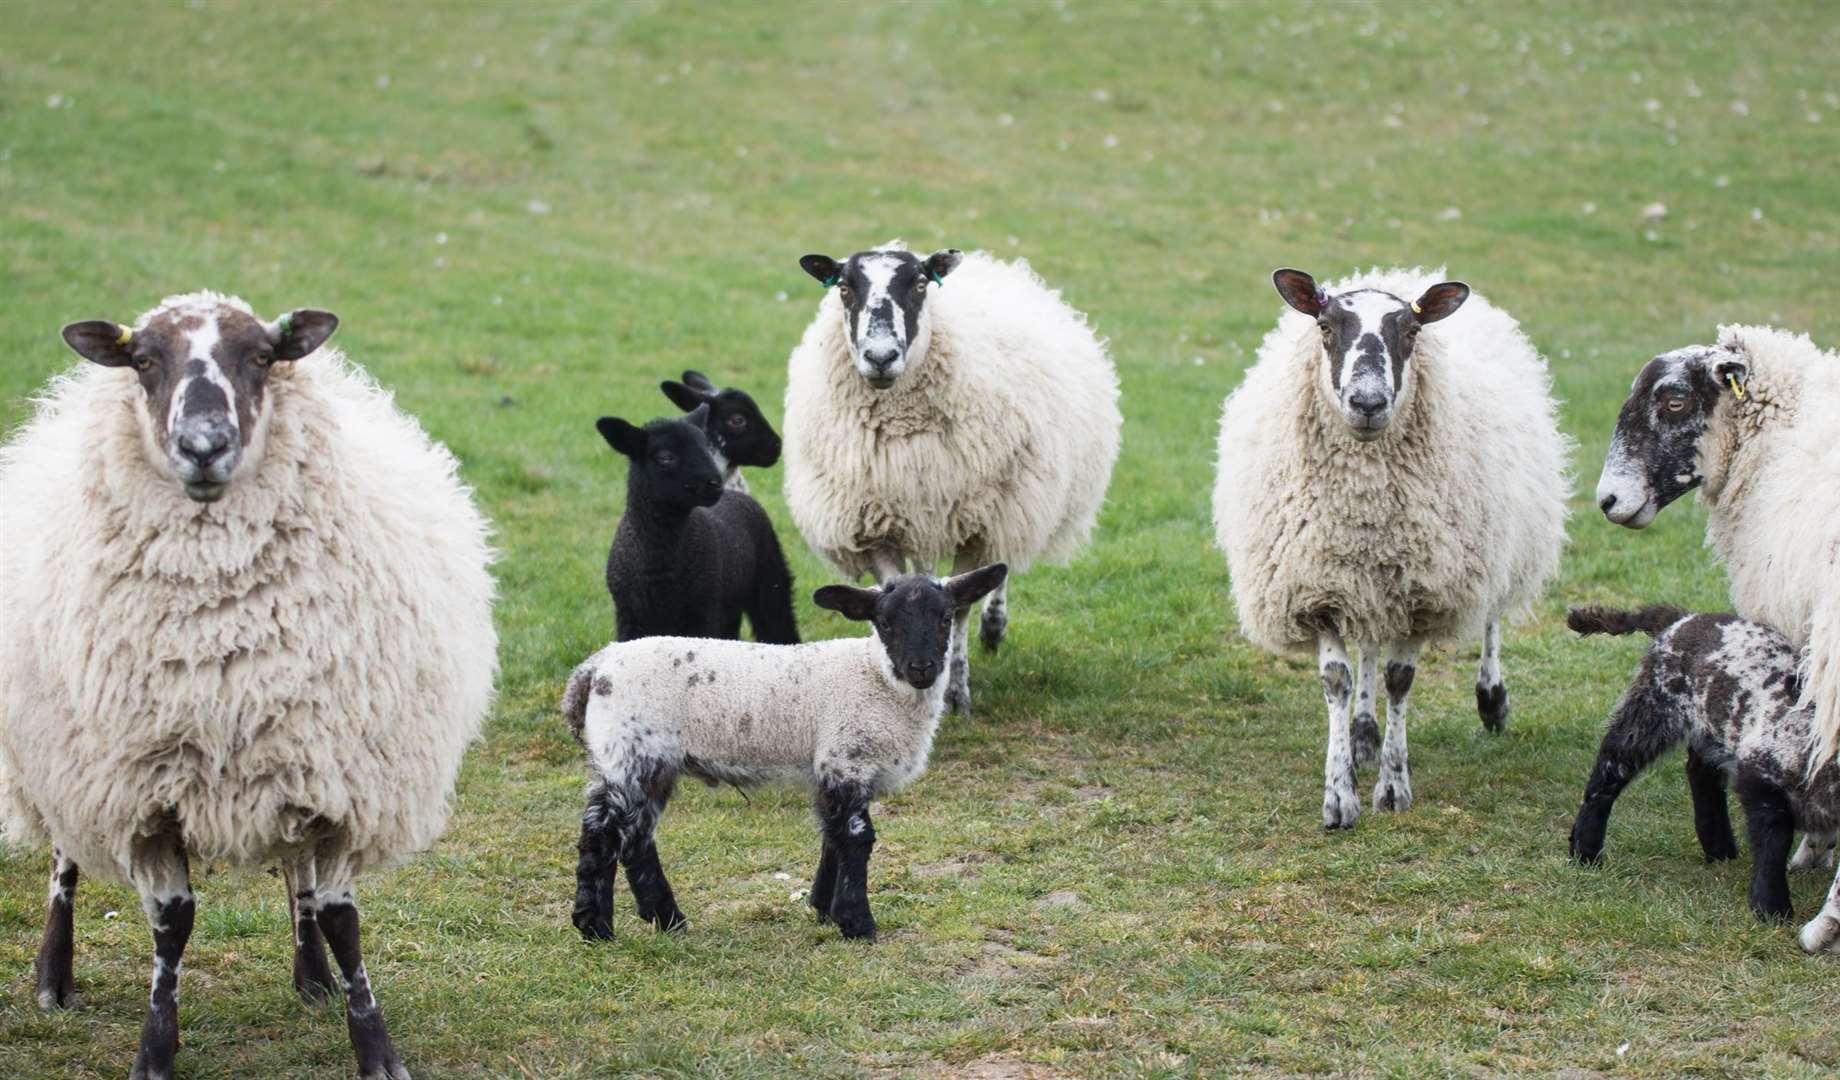 Dog owners are reminded to keep their pets under control and the warning comes at a critical time for farmers as peak lambing period is underway.